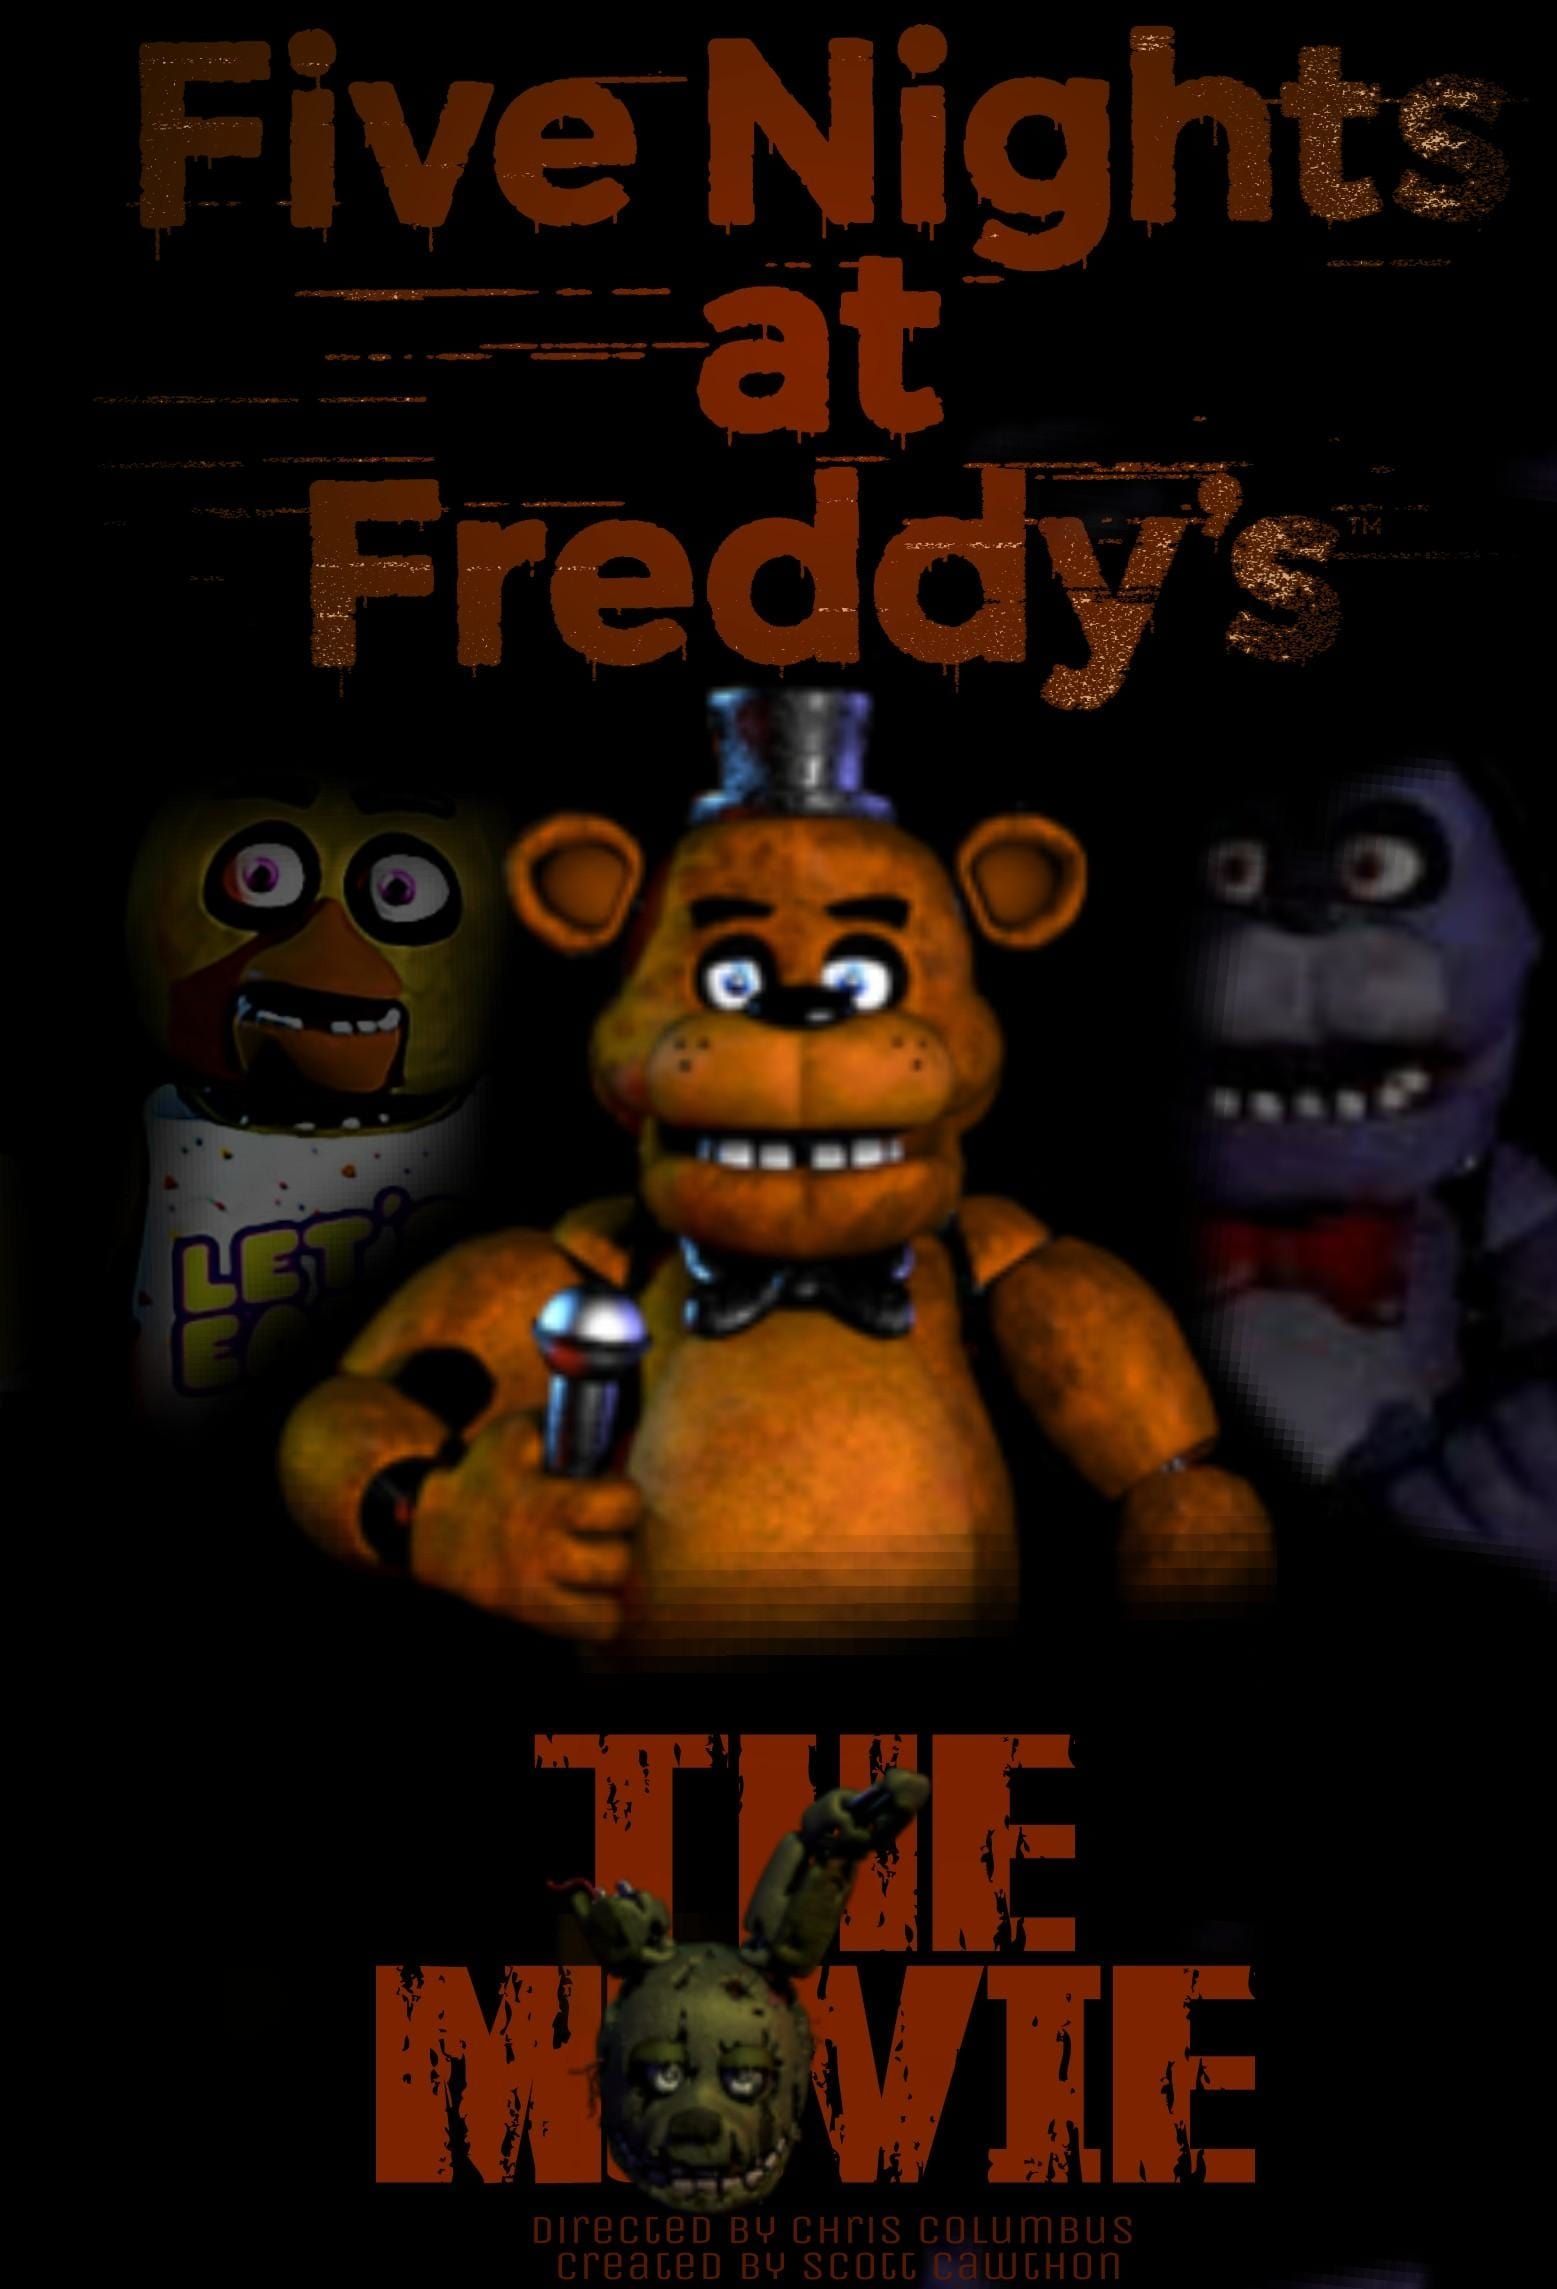 tom cruise five nights at freddy's